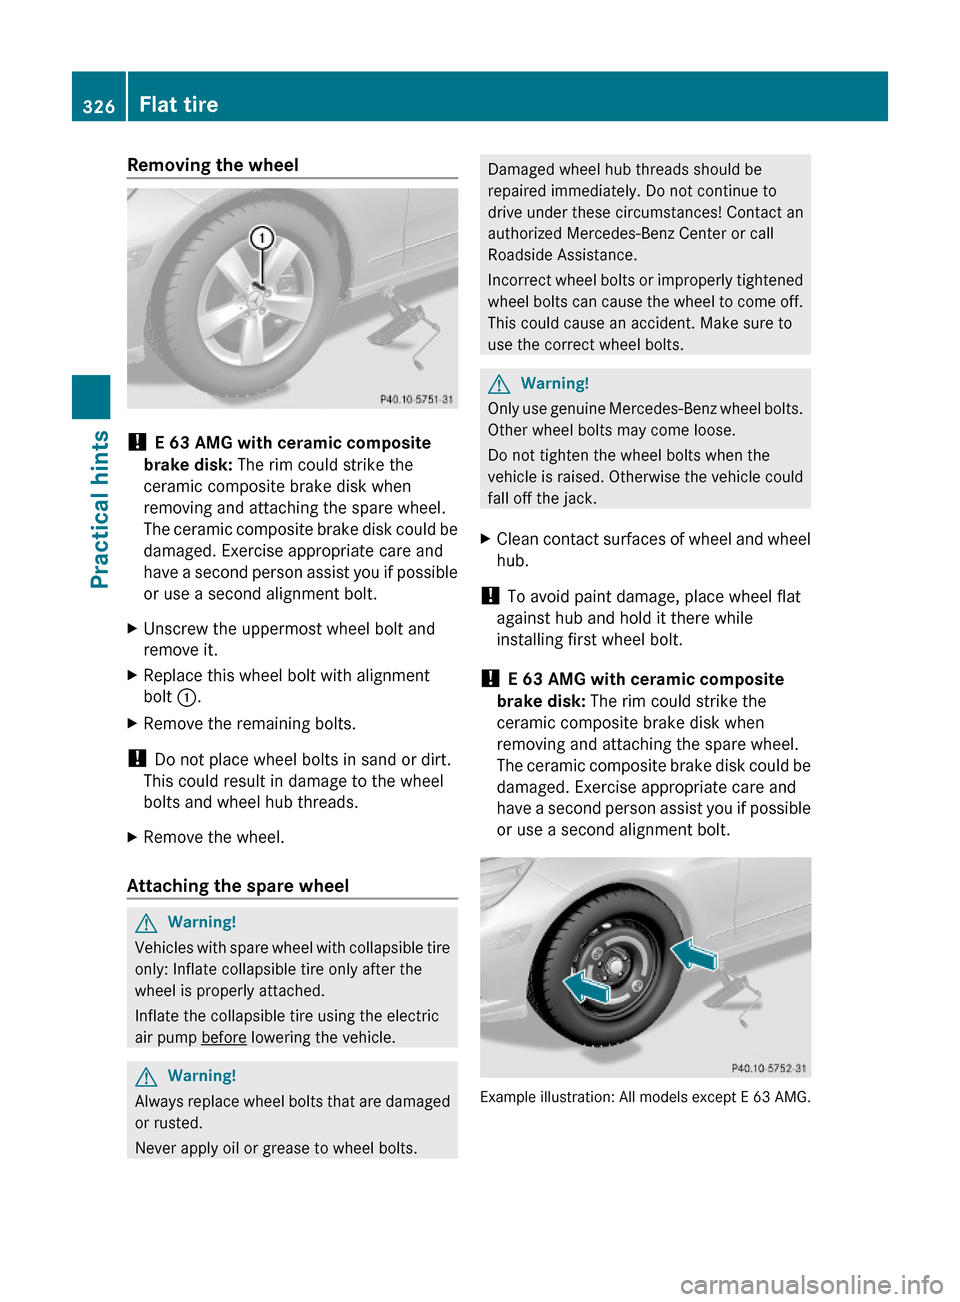 MERCEDES-BENZ E350 2010 W212 Owners Manual Removing the wheel
! E 63 AMG with ceramic composite 
brake disk: The rim could strike the
ceramic composite brake disk when
removing and attaching the spare wheel.
The ceramic composite brake disk co